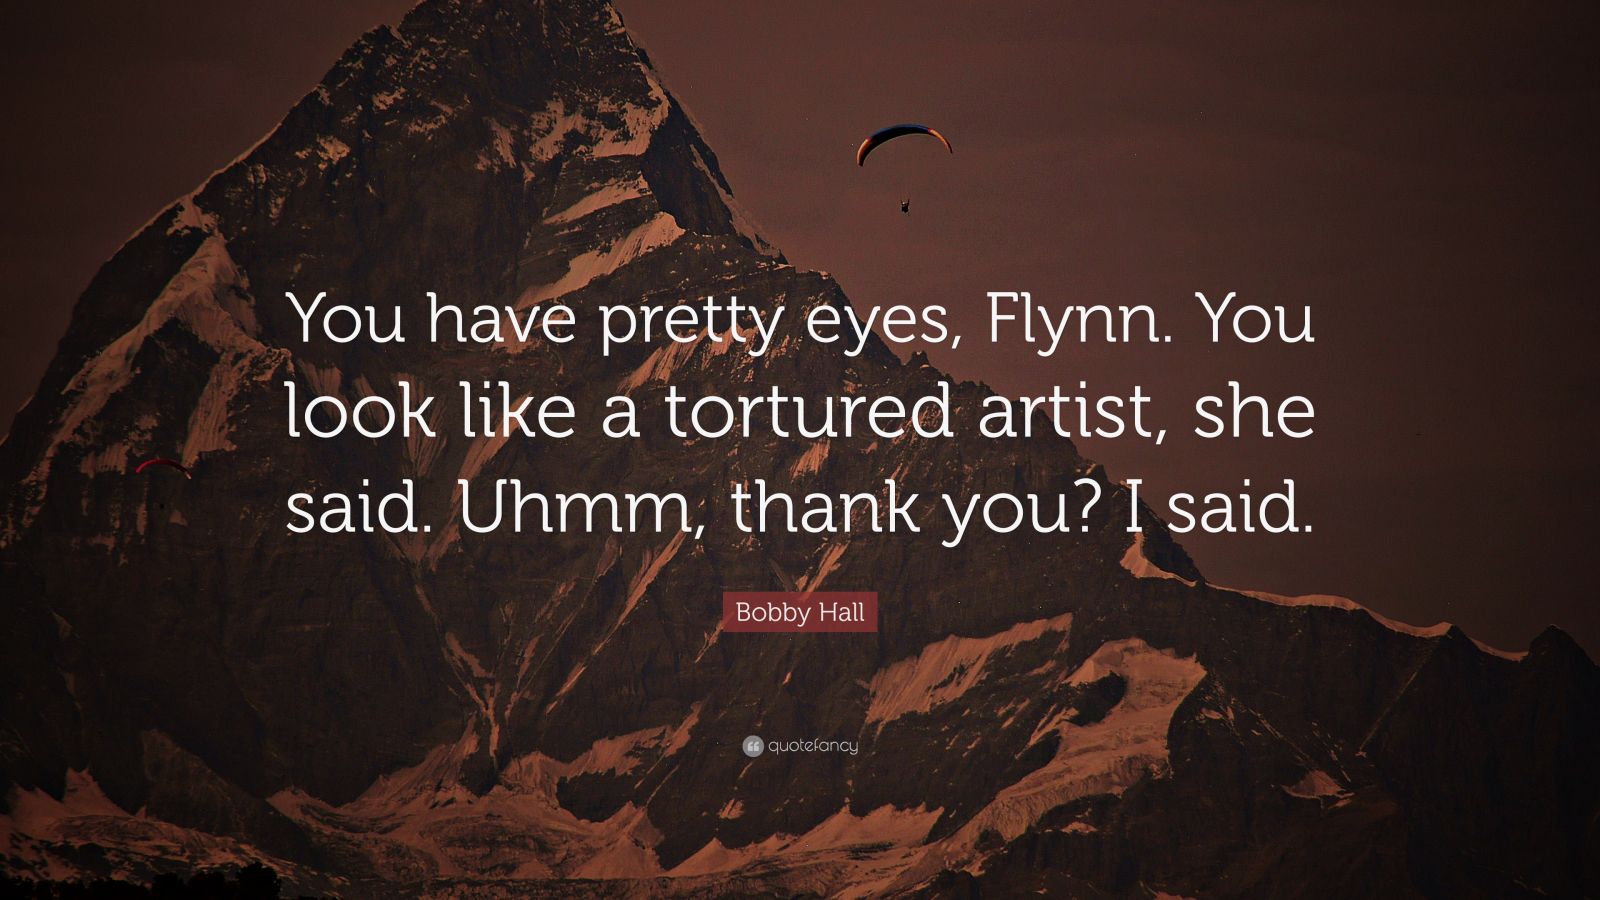 Bobby Hall Quote: “You have pretty eyes, Flynn. You look like a ...